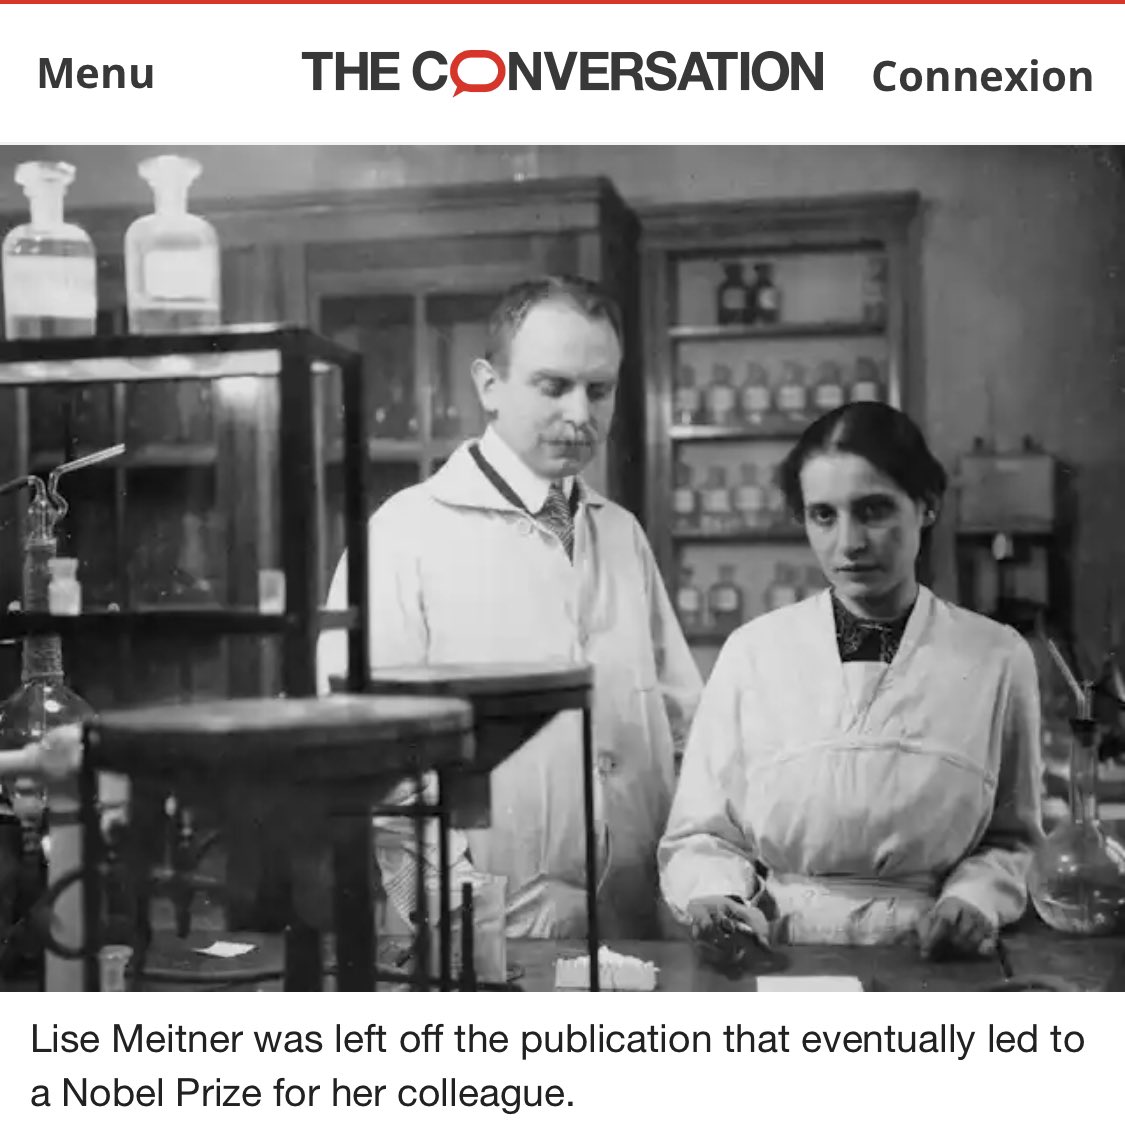 Dear @stats_feed nuclear fission was actually discovered by Lisa Meitner. It is time for her to get the true recognition she deserves theconversation.com/lise-meitner-t…